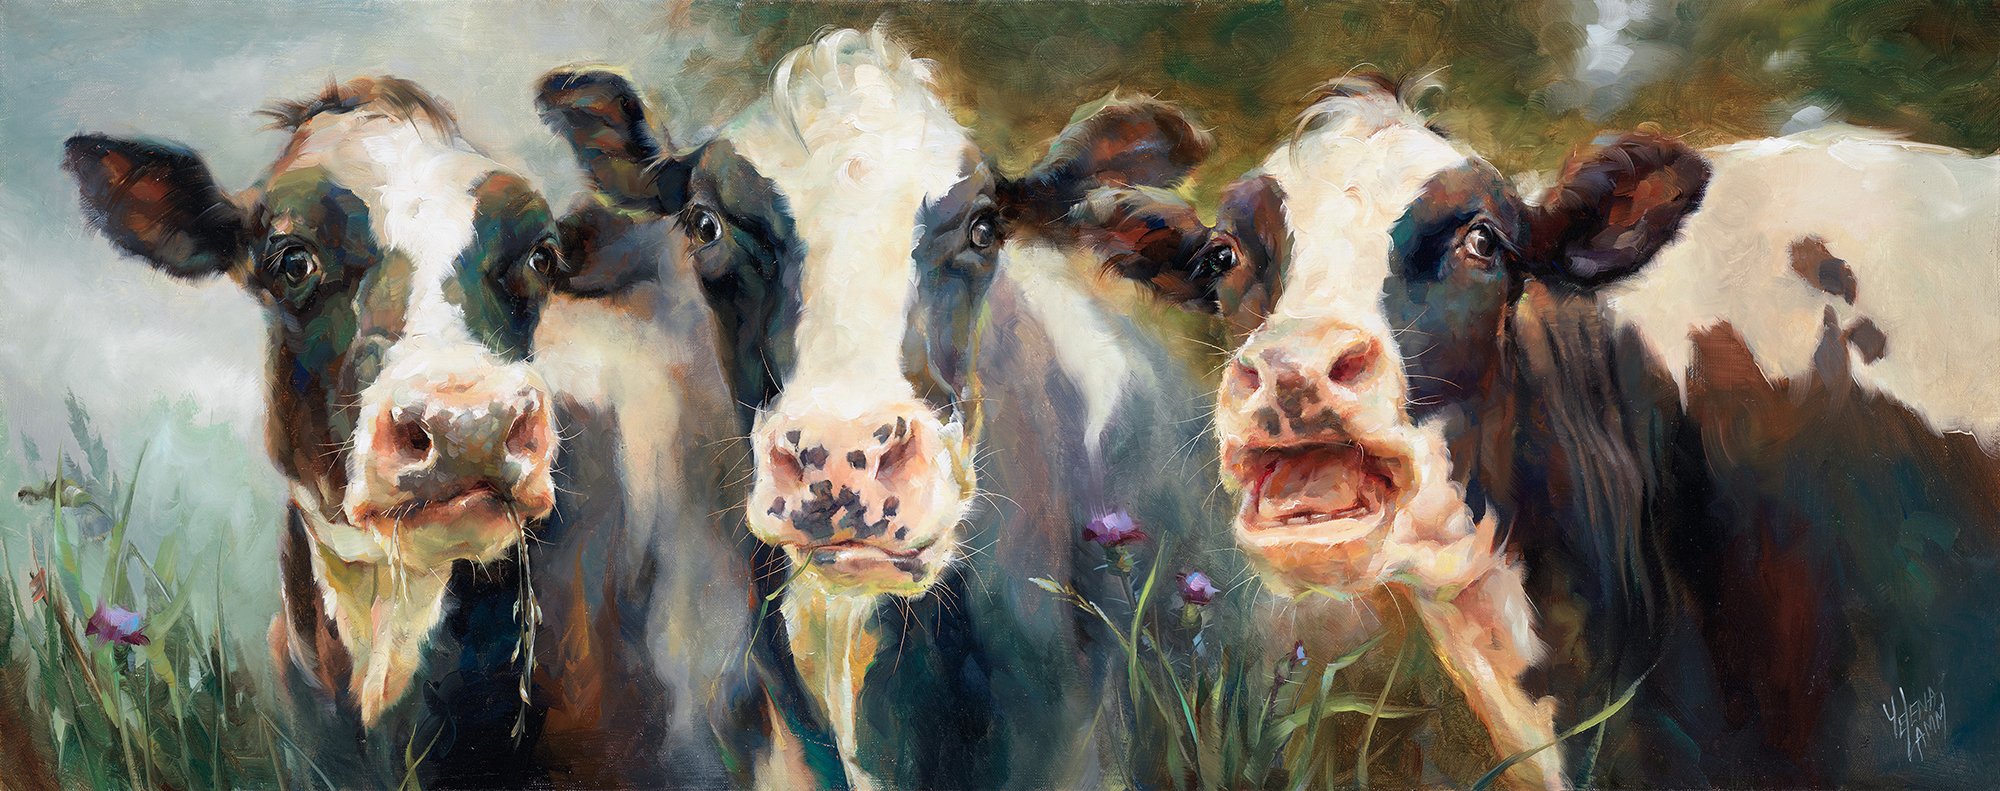   Dispute  🔴   SOLD 40” x 16” oil     Society of Animal Artists 63rd Annual Exhibition : Driftless Glen Purchase Award and SAA Newcomer Award 16th ARC (Art Renewal Center) Salon  Semi-Finalist  